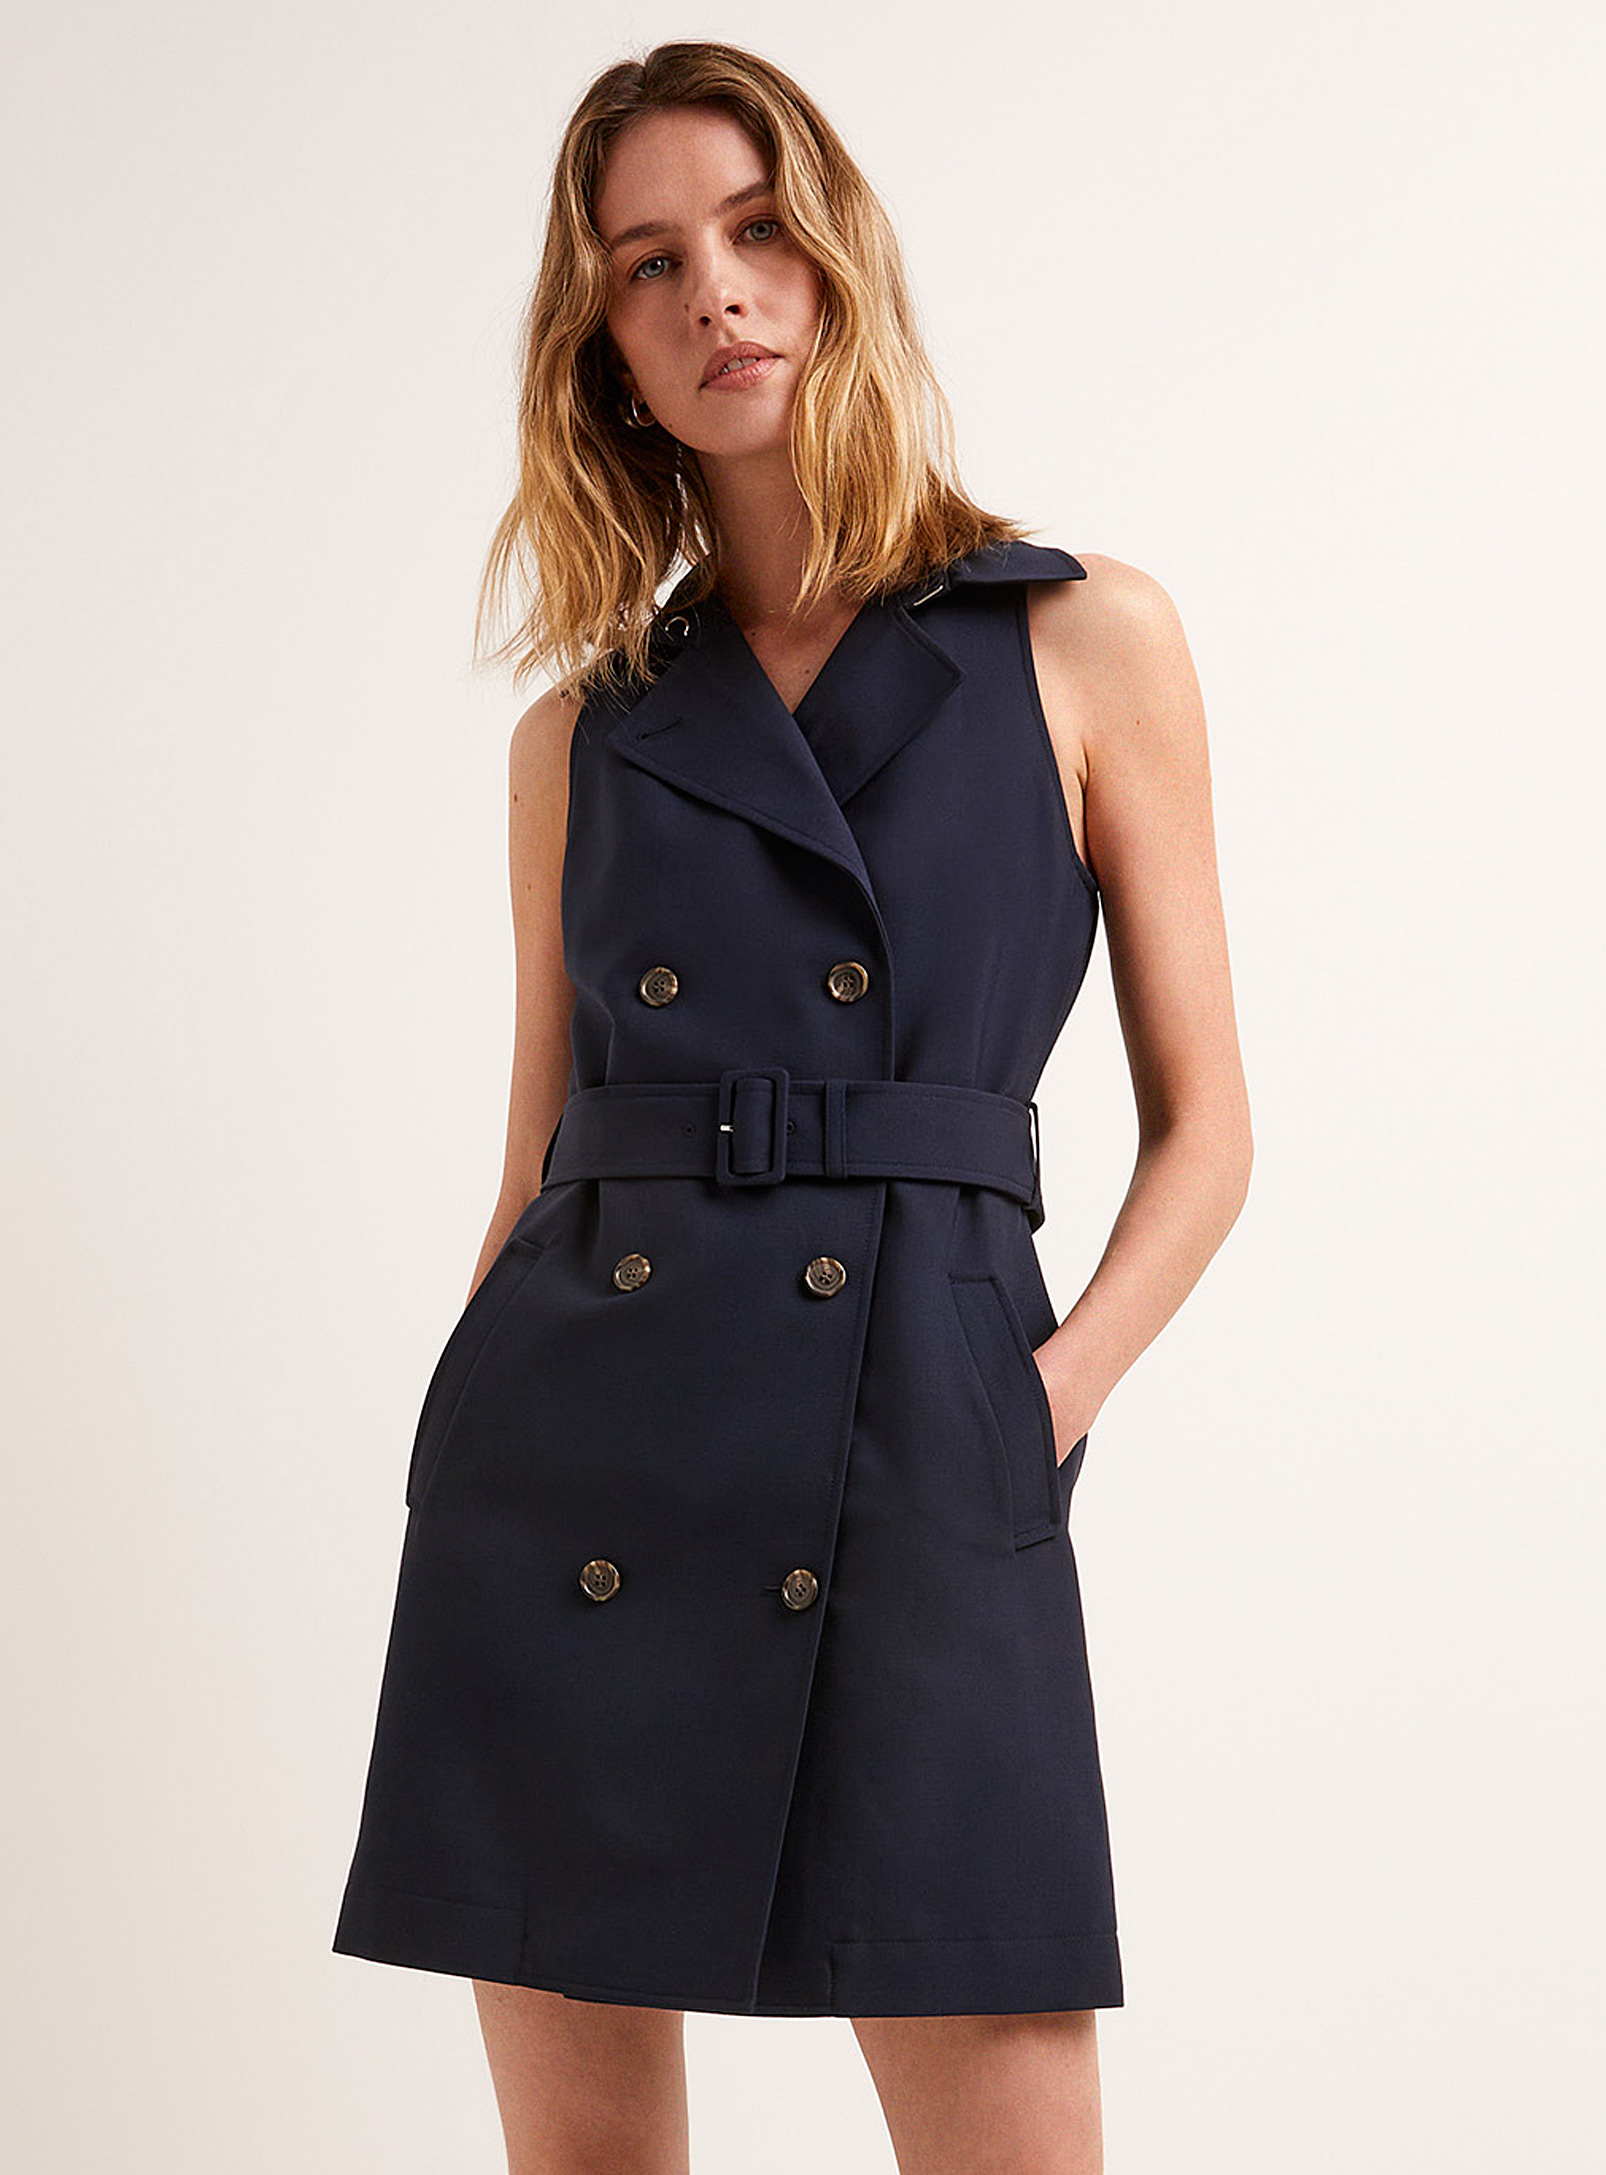 Theory - Women's Belted navy trench coat dress